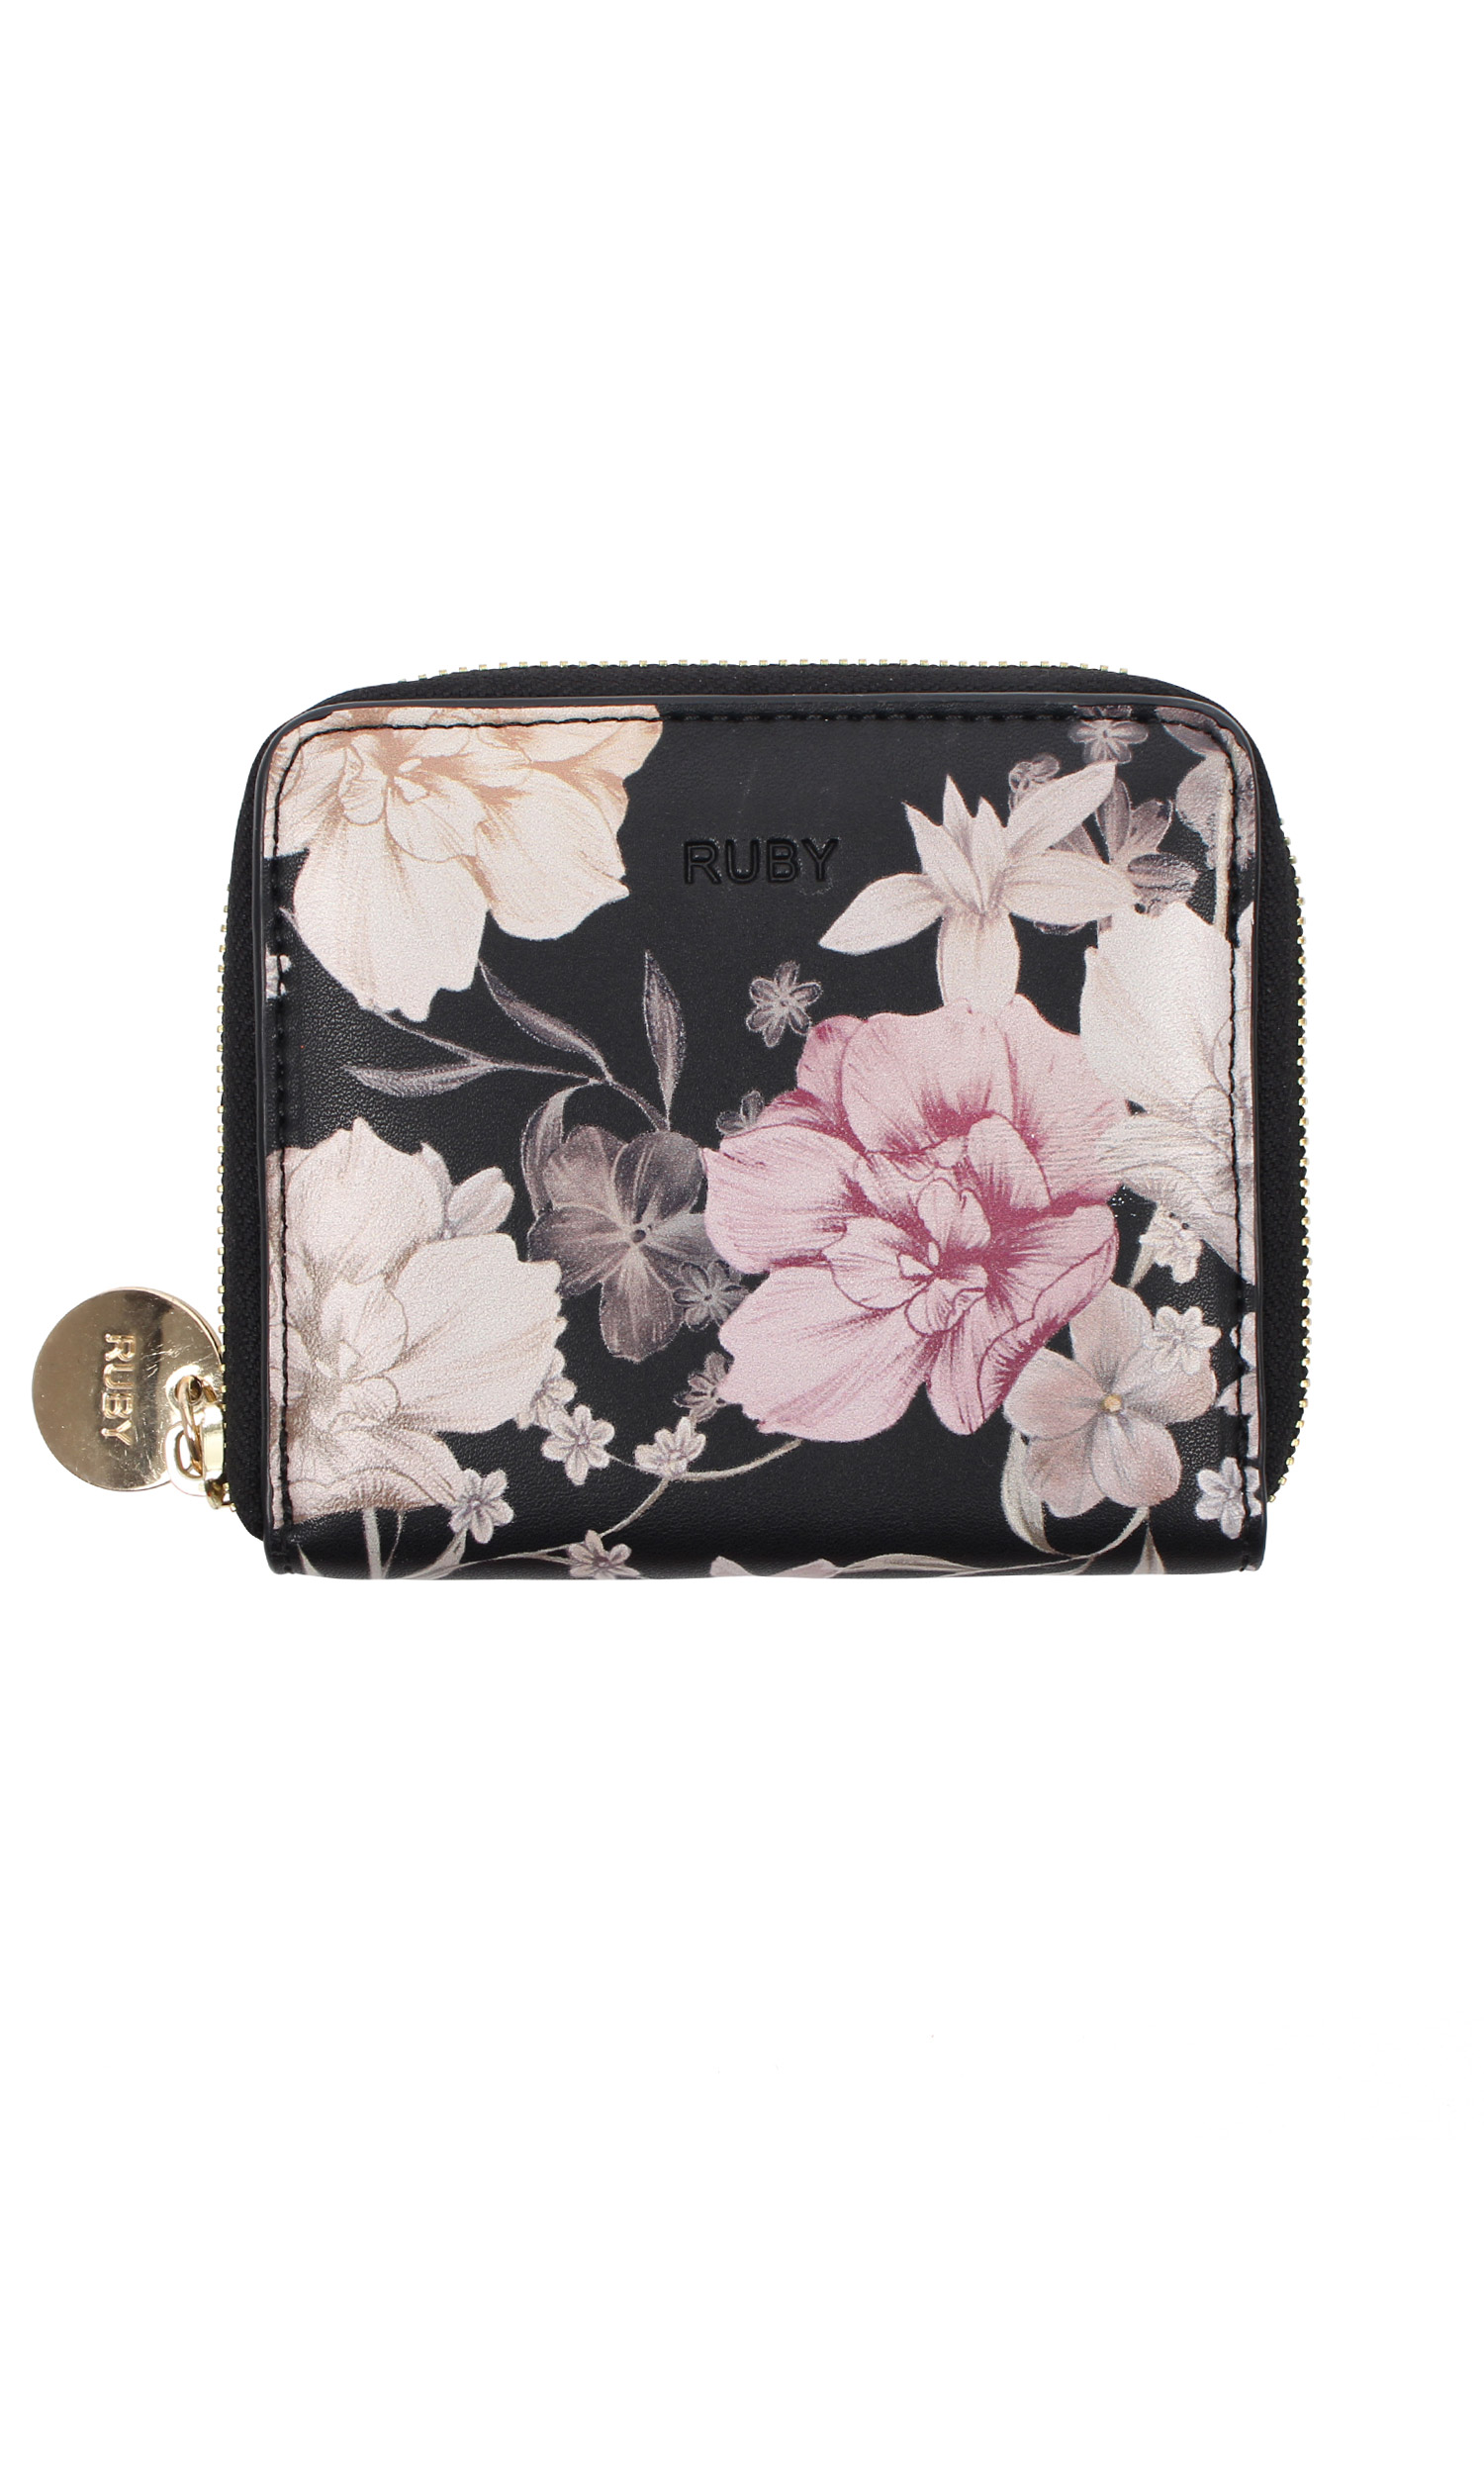 Baby Zip Up wallet, $99 from RUBY